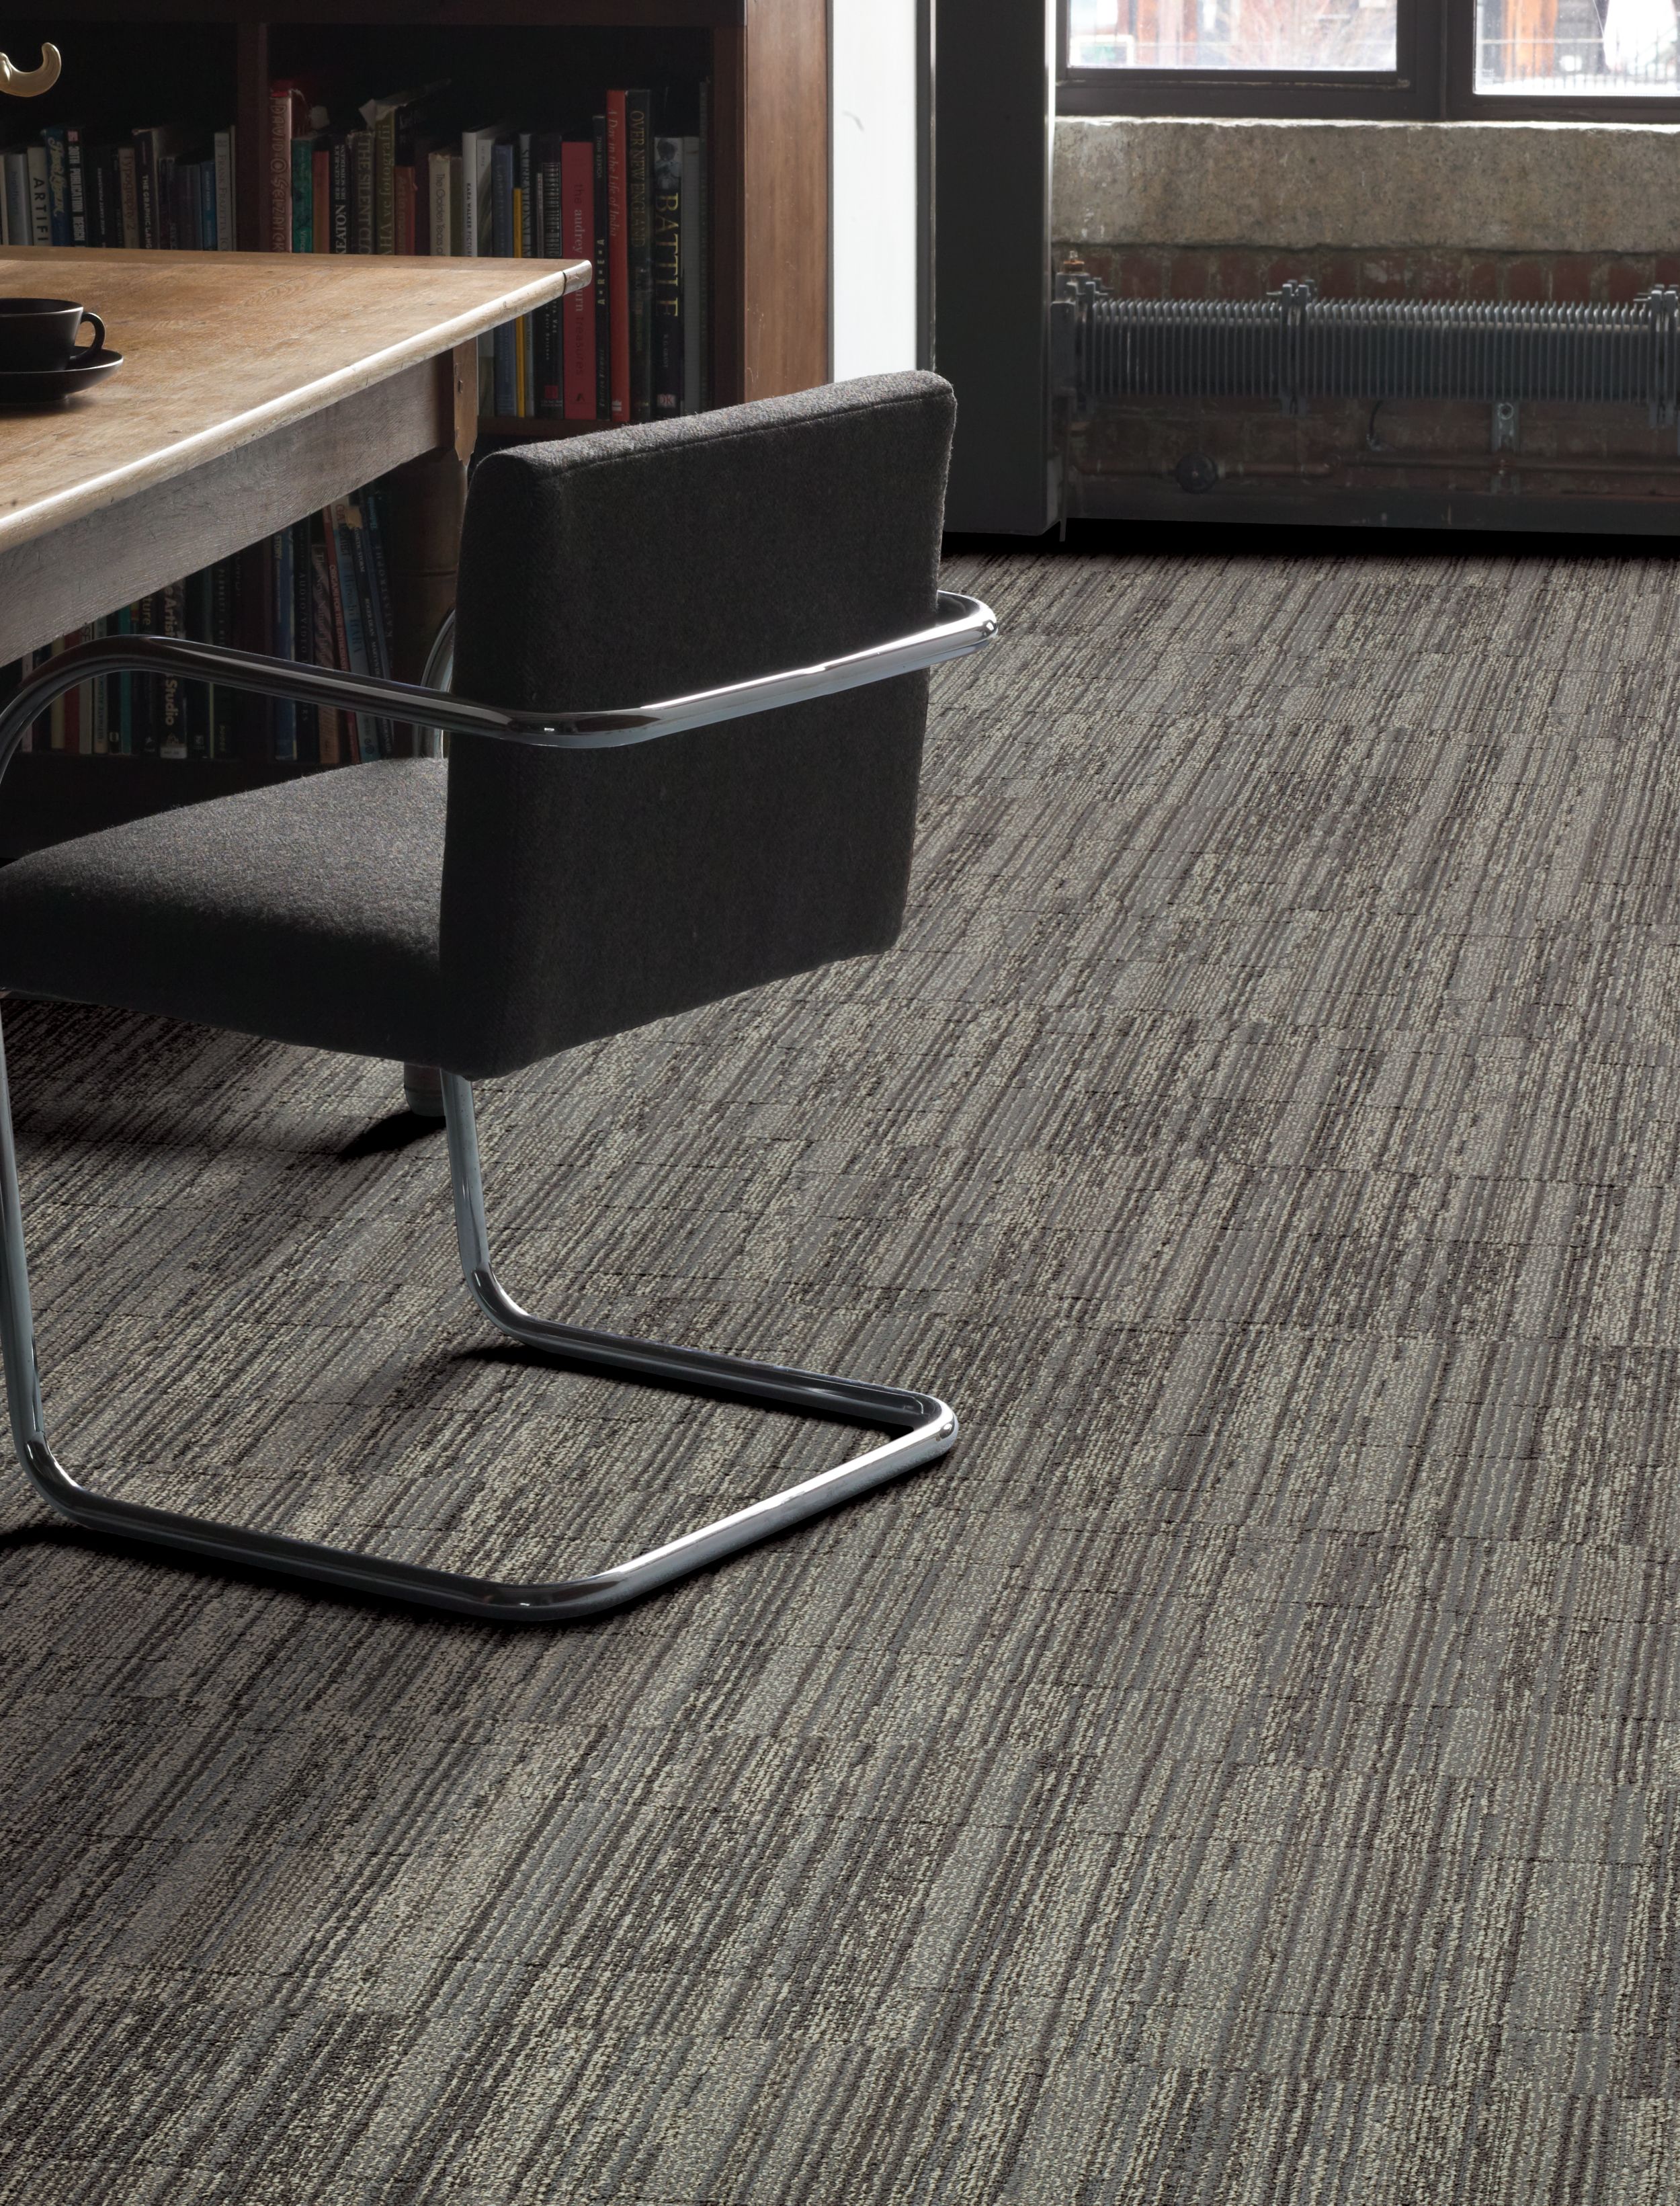 Interface Permian carept tile in private office area with desk and chair imagen número 4